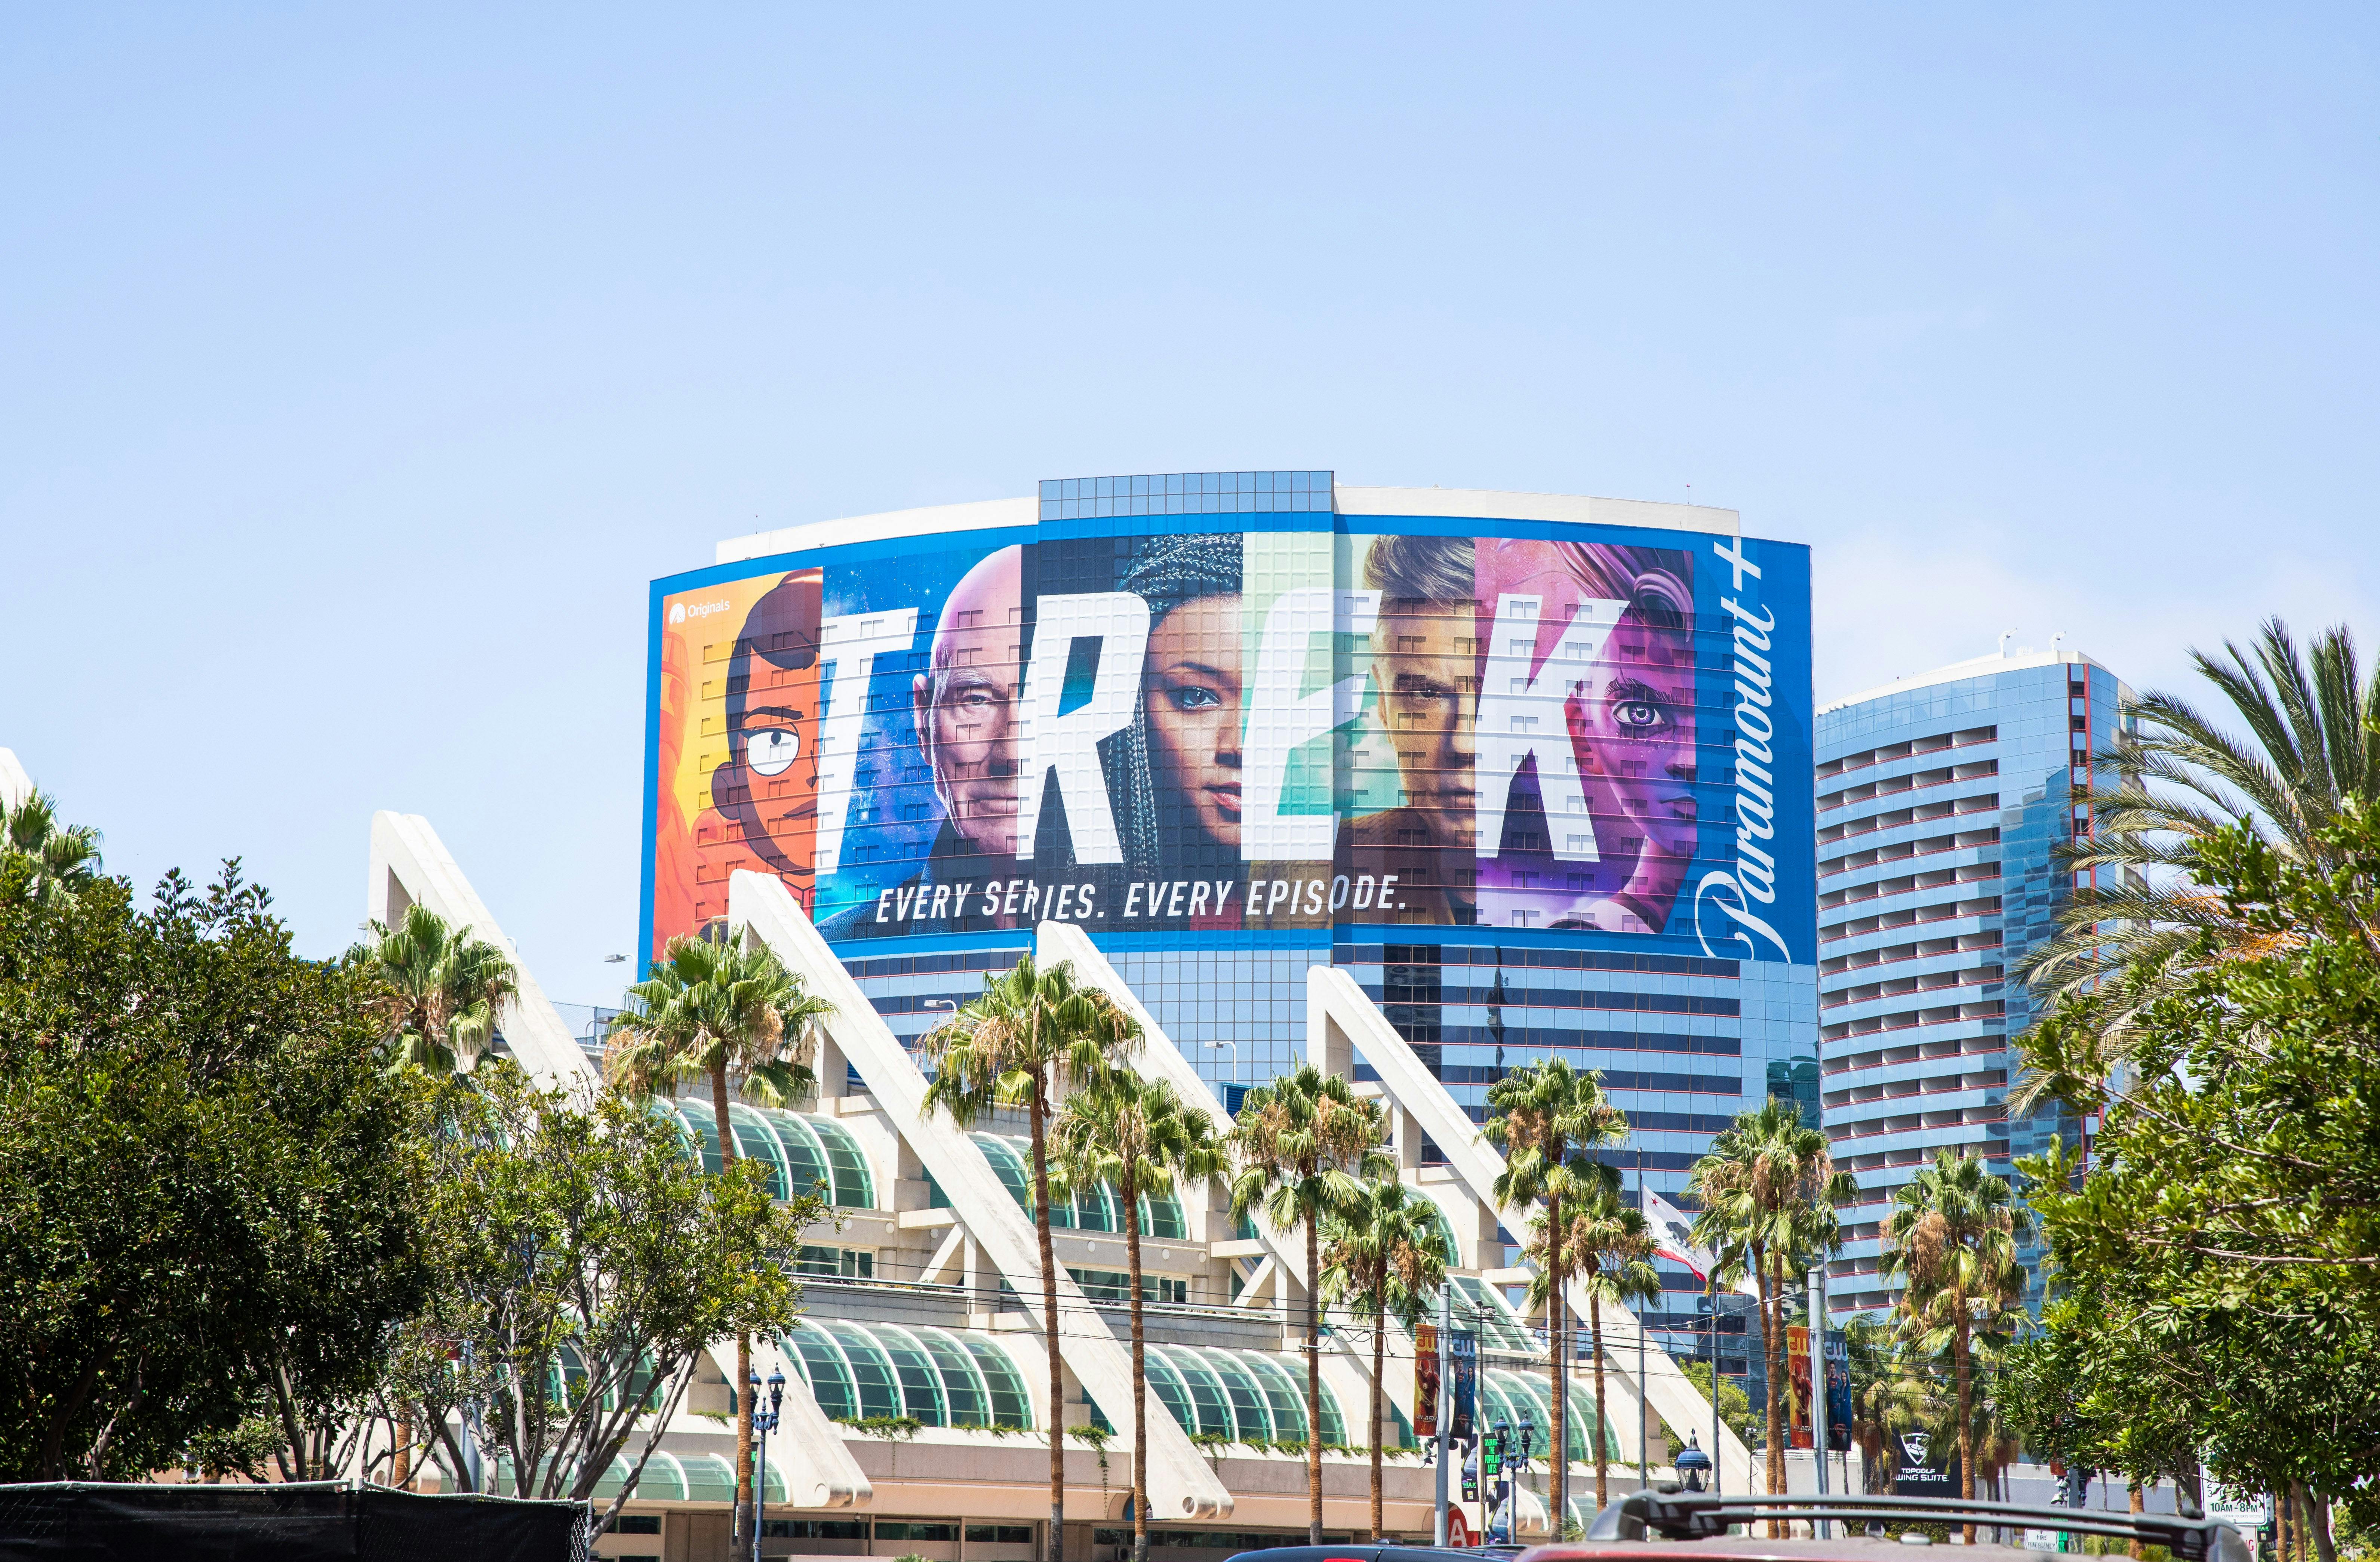 The Star Trek on Paramount+ billboard, featuring Lower Decks, Picard, Discovery, Strange New Worlds, and Prodigy.